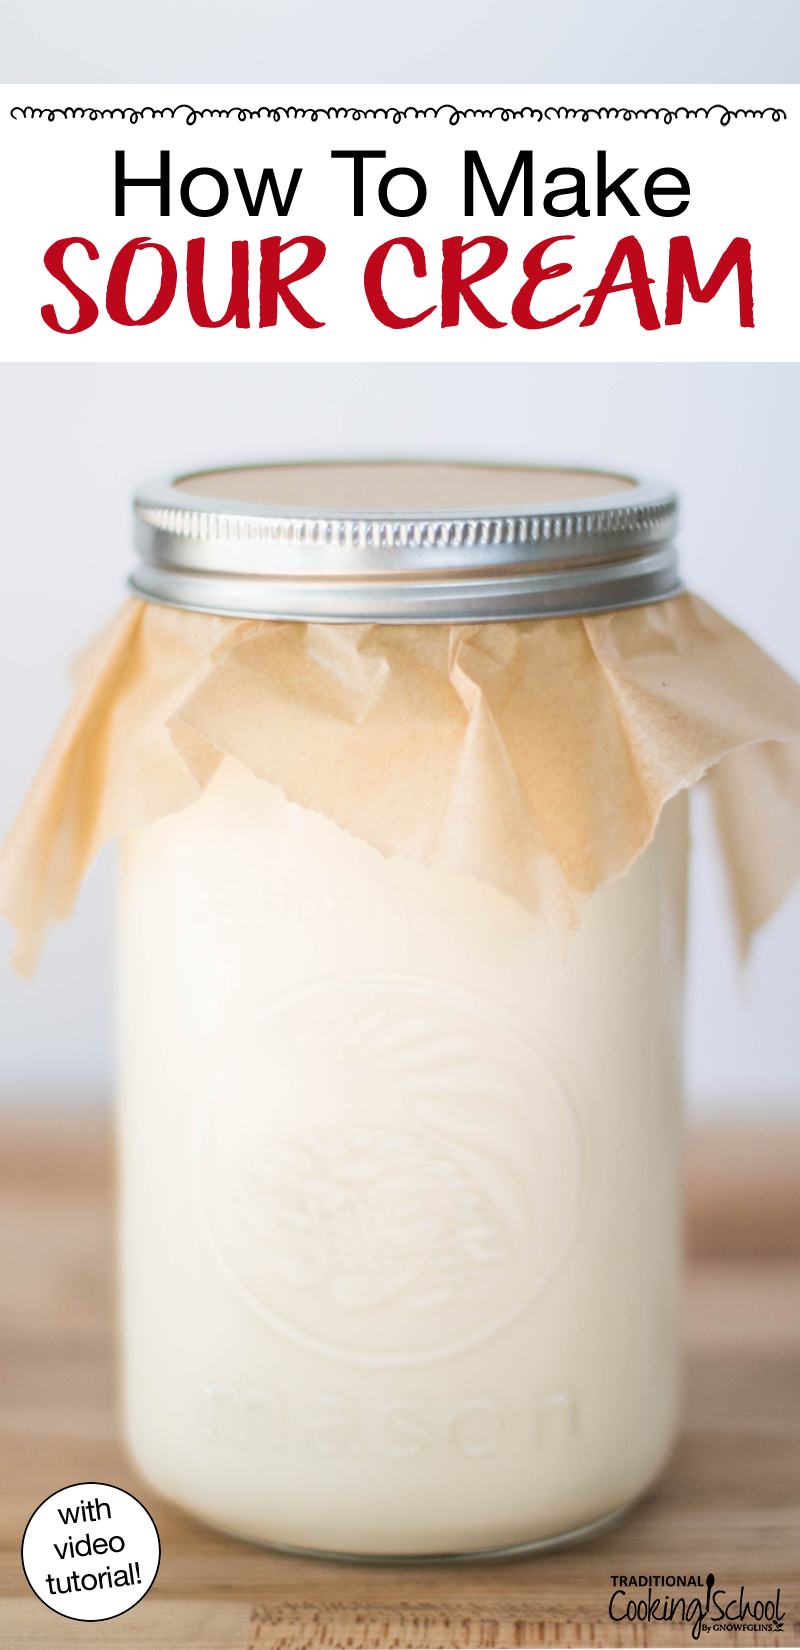 Jar of cream covered with parchment paper and a metal band. Text overlay says: "How To Make Sour Cream (with video tutorial)"